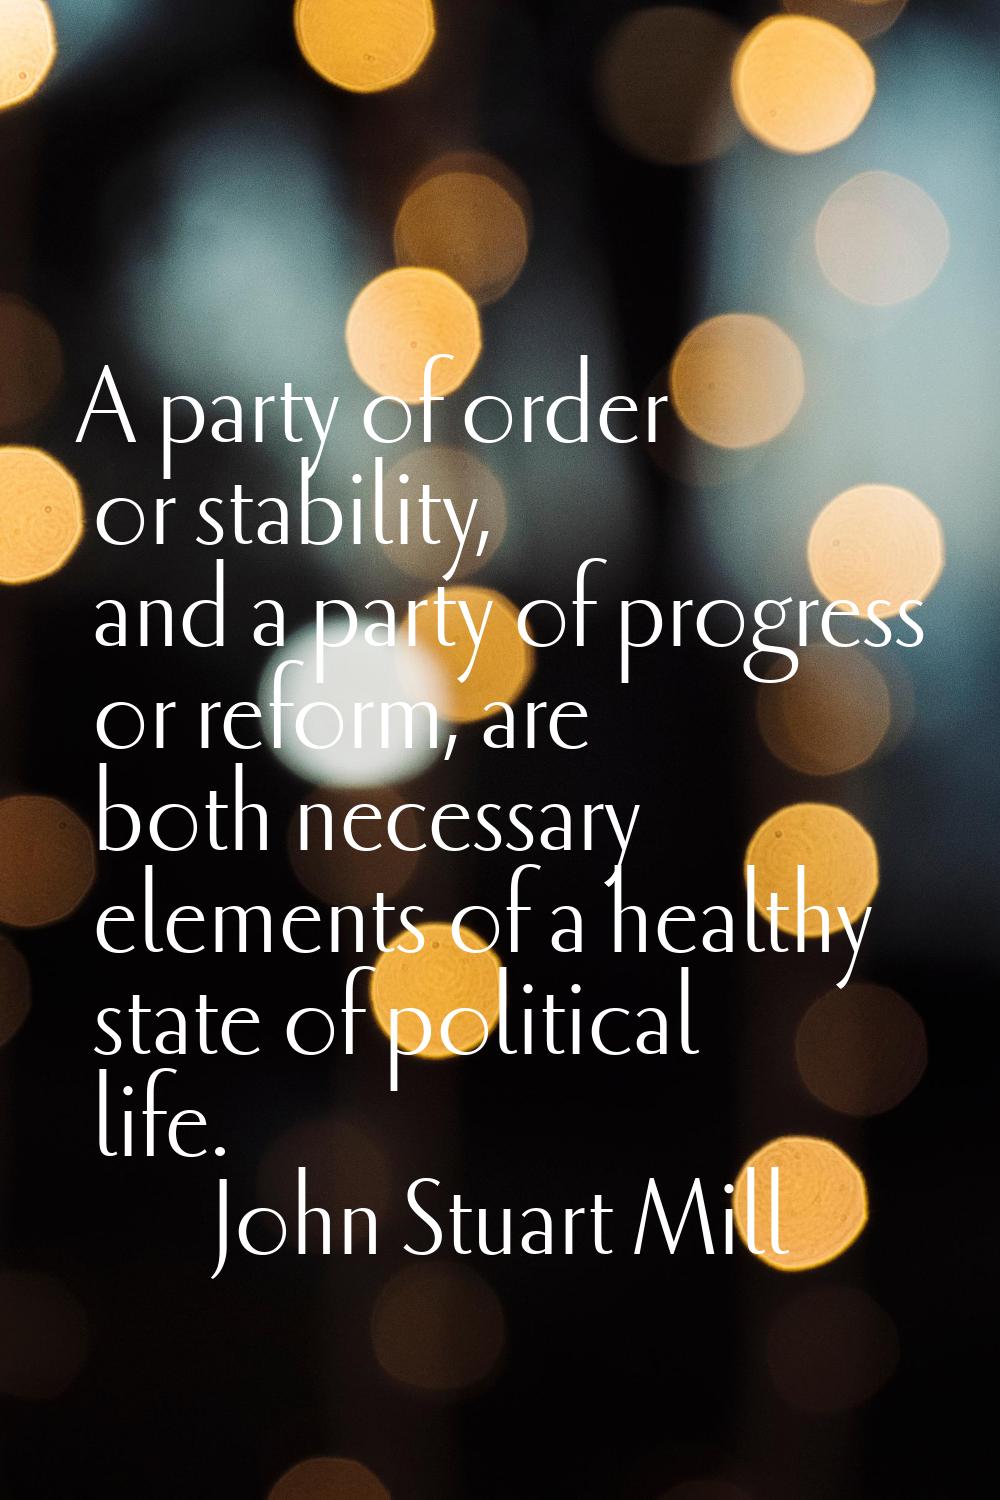 A party of order or stability, and a party of progress or reform, are both necessary elements of a 